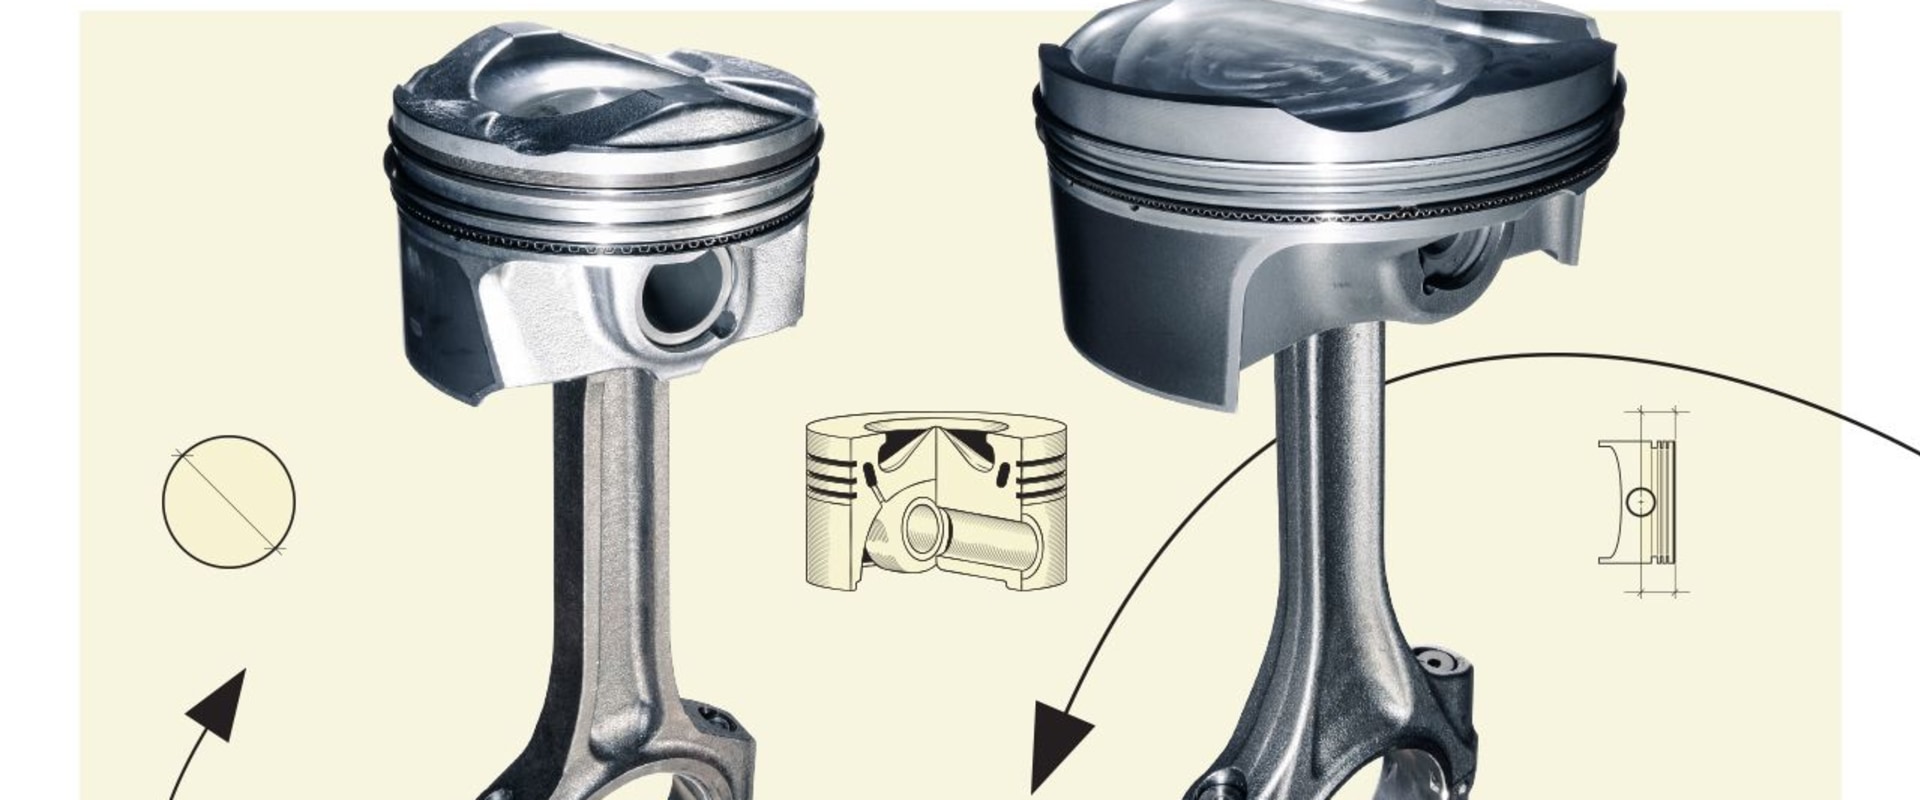 All You Need to Know About Pistons and Cylinders